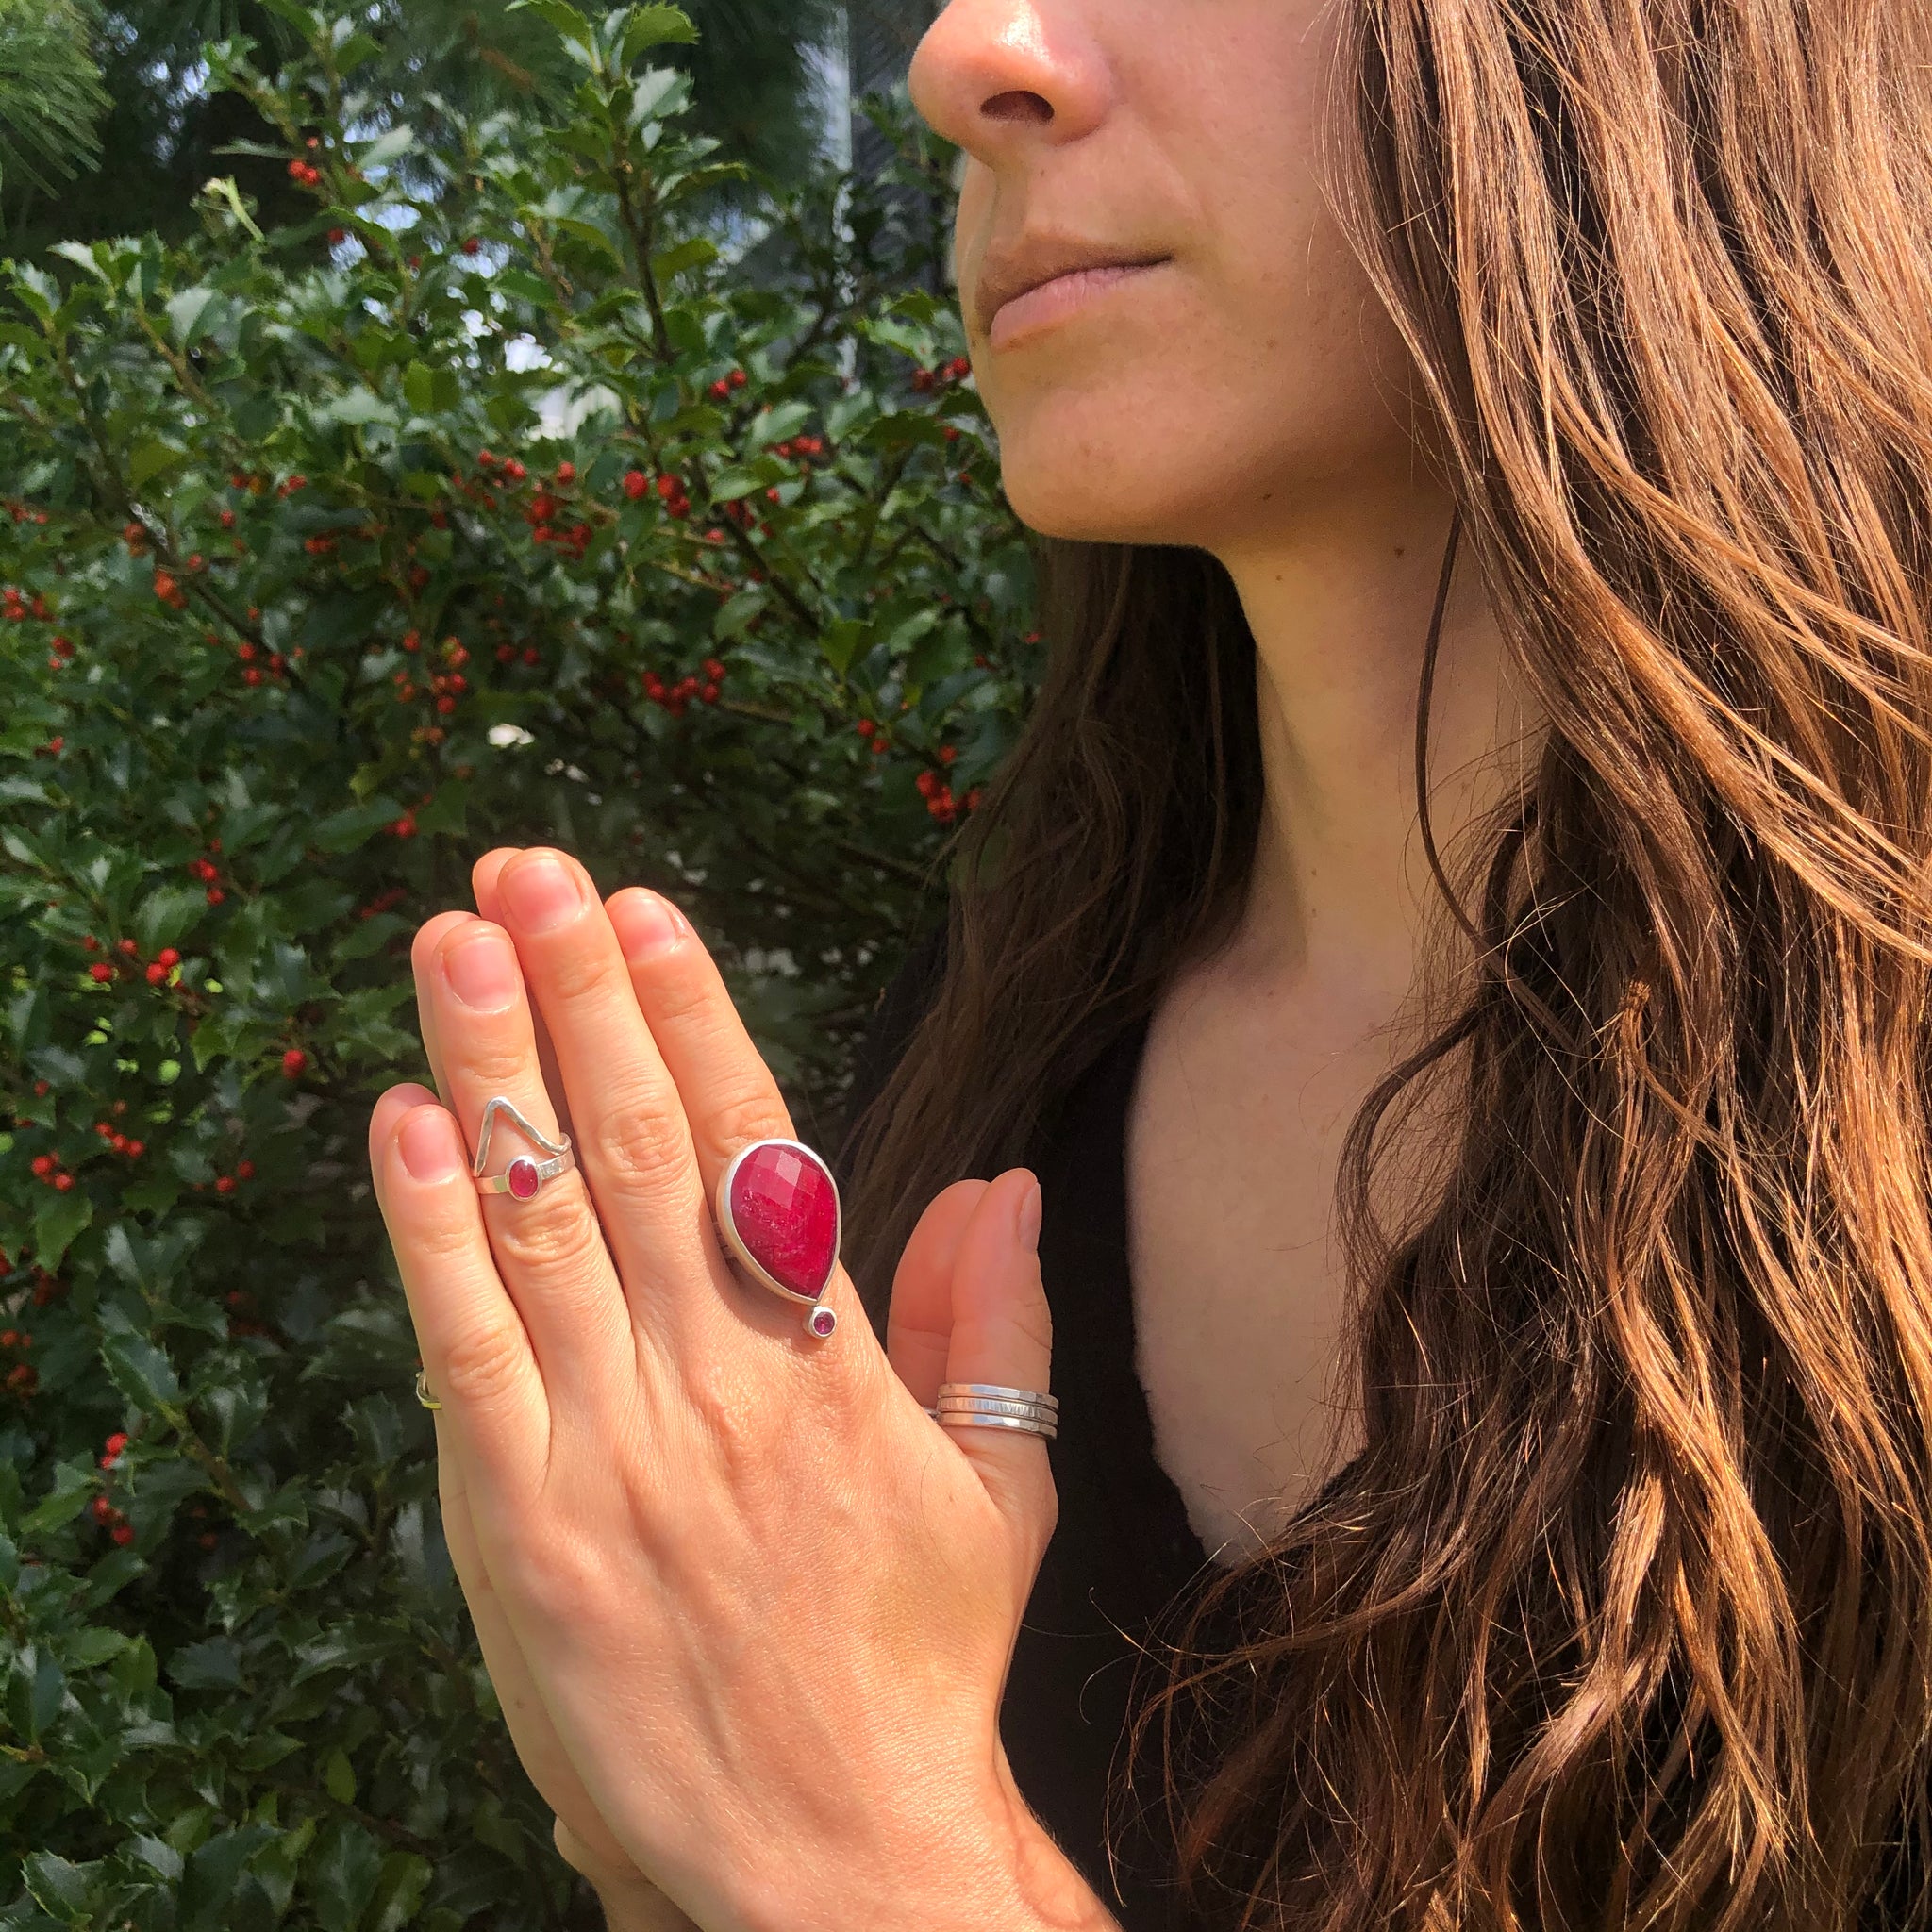 Spiritual Jewelry: How to Adorn Yourself with Meaning